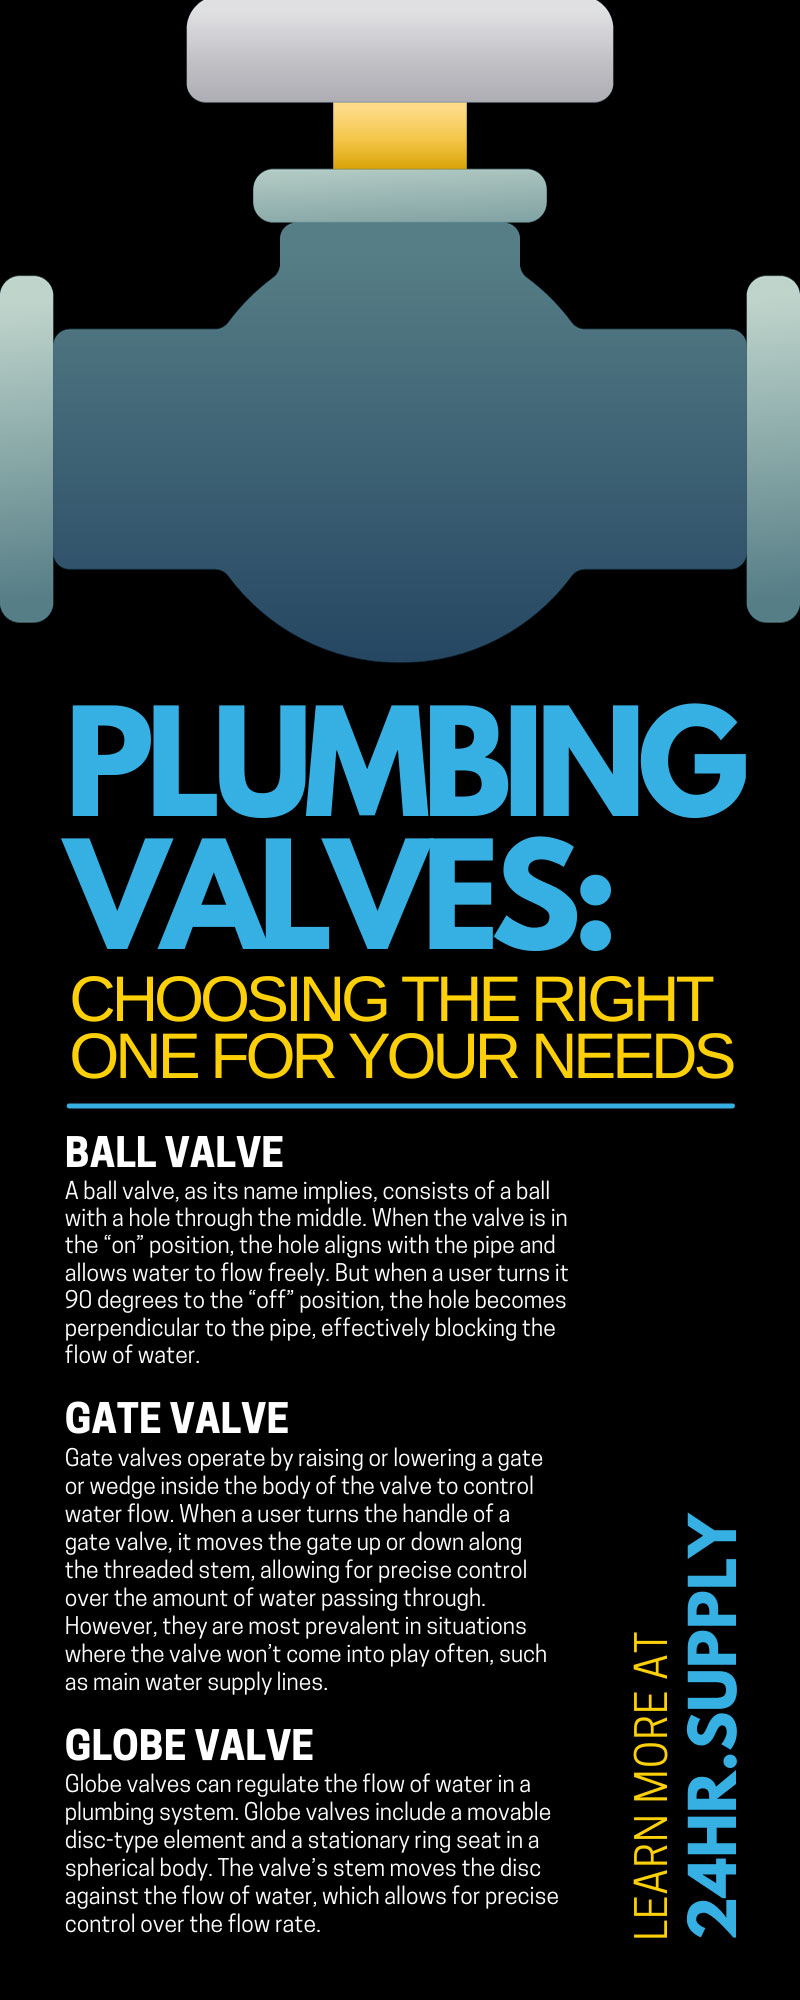 Plumbing Valves: Choosing the Right One for Your Needs